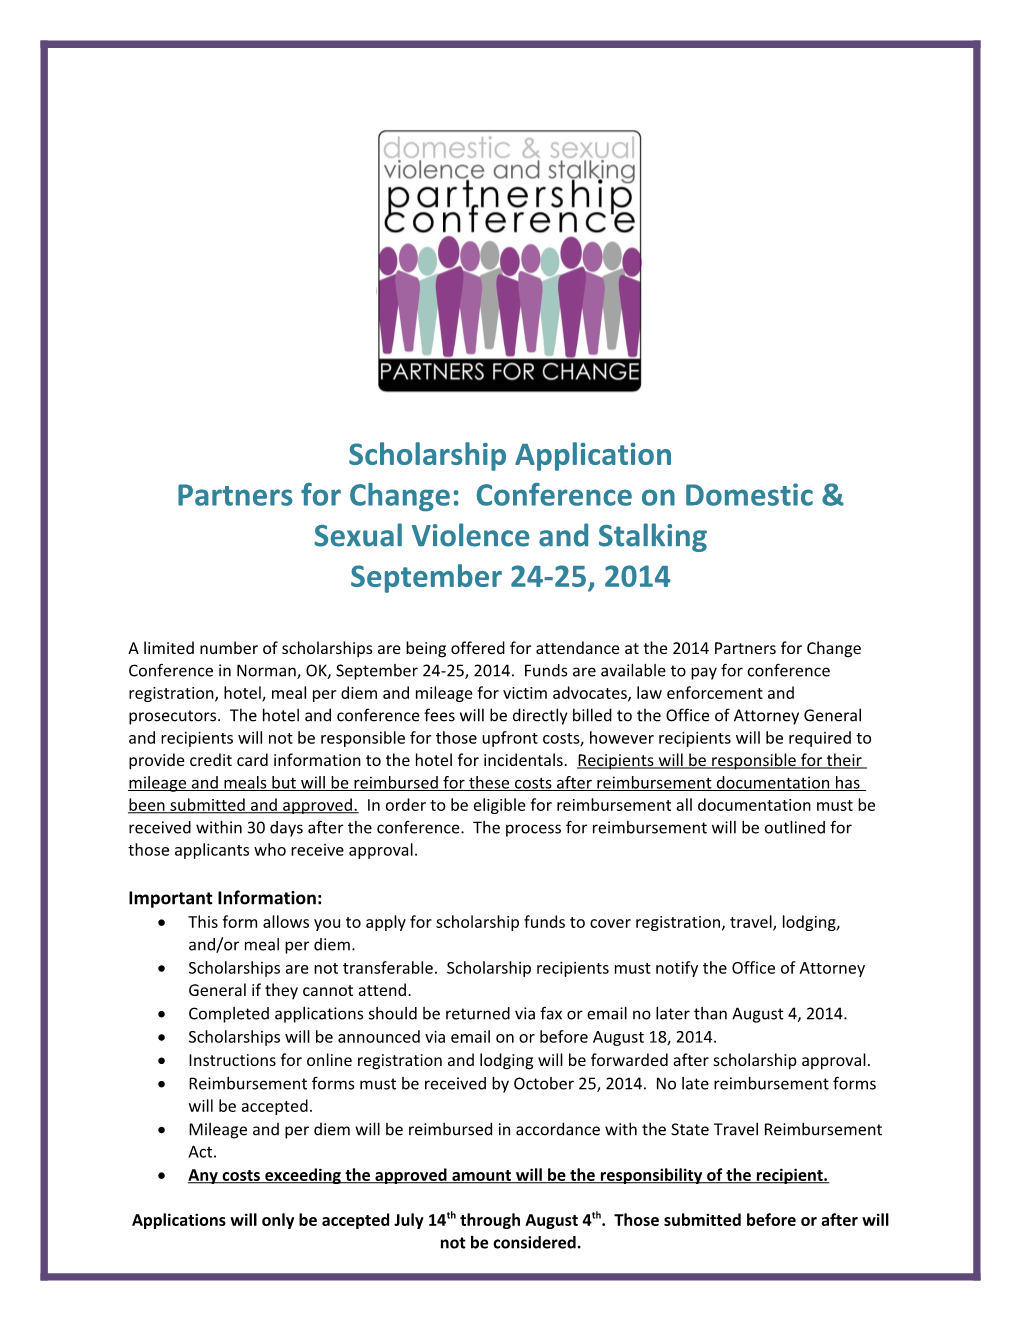 Partners for Change: Conference on Domestic & Sexual Violence and Stalking